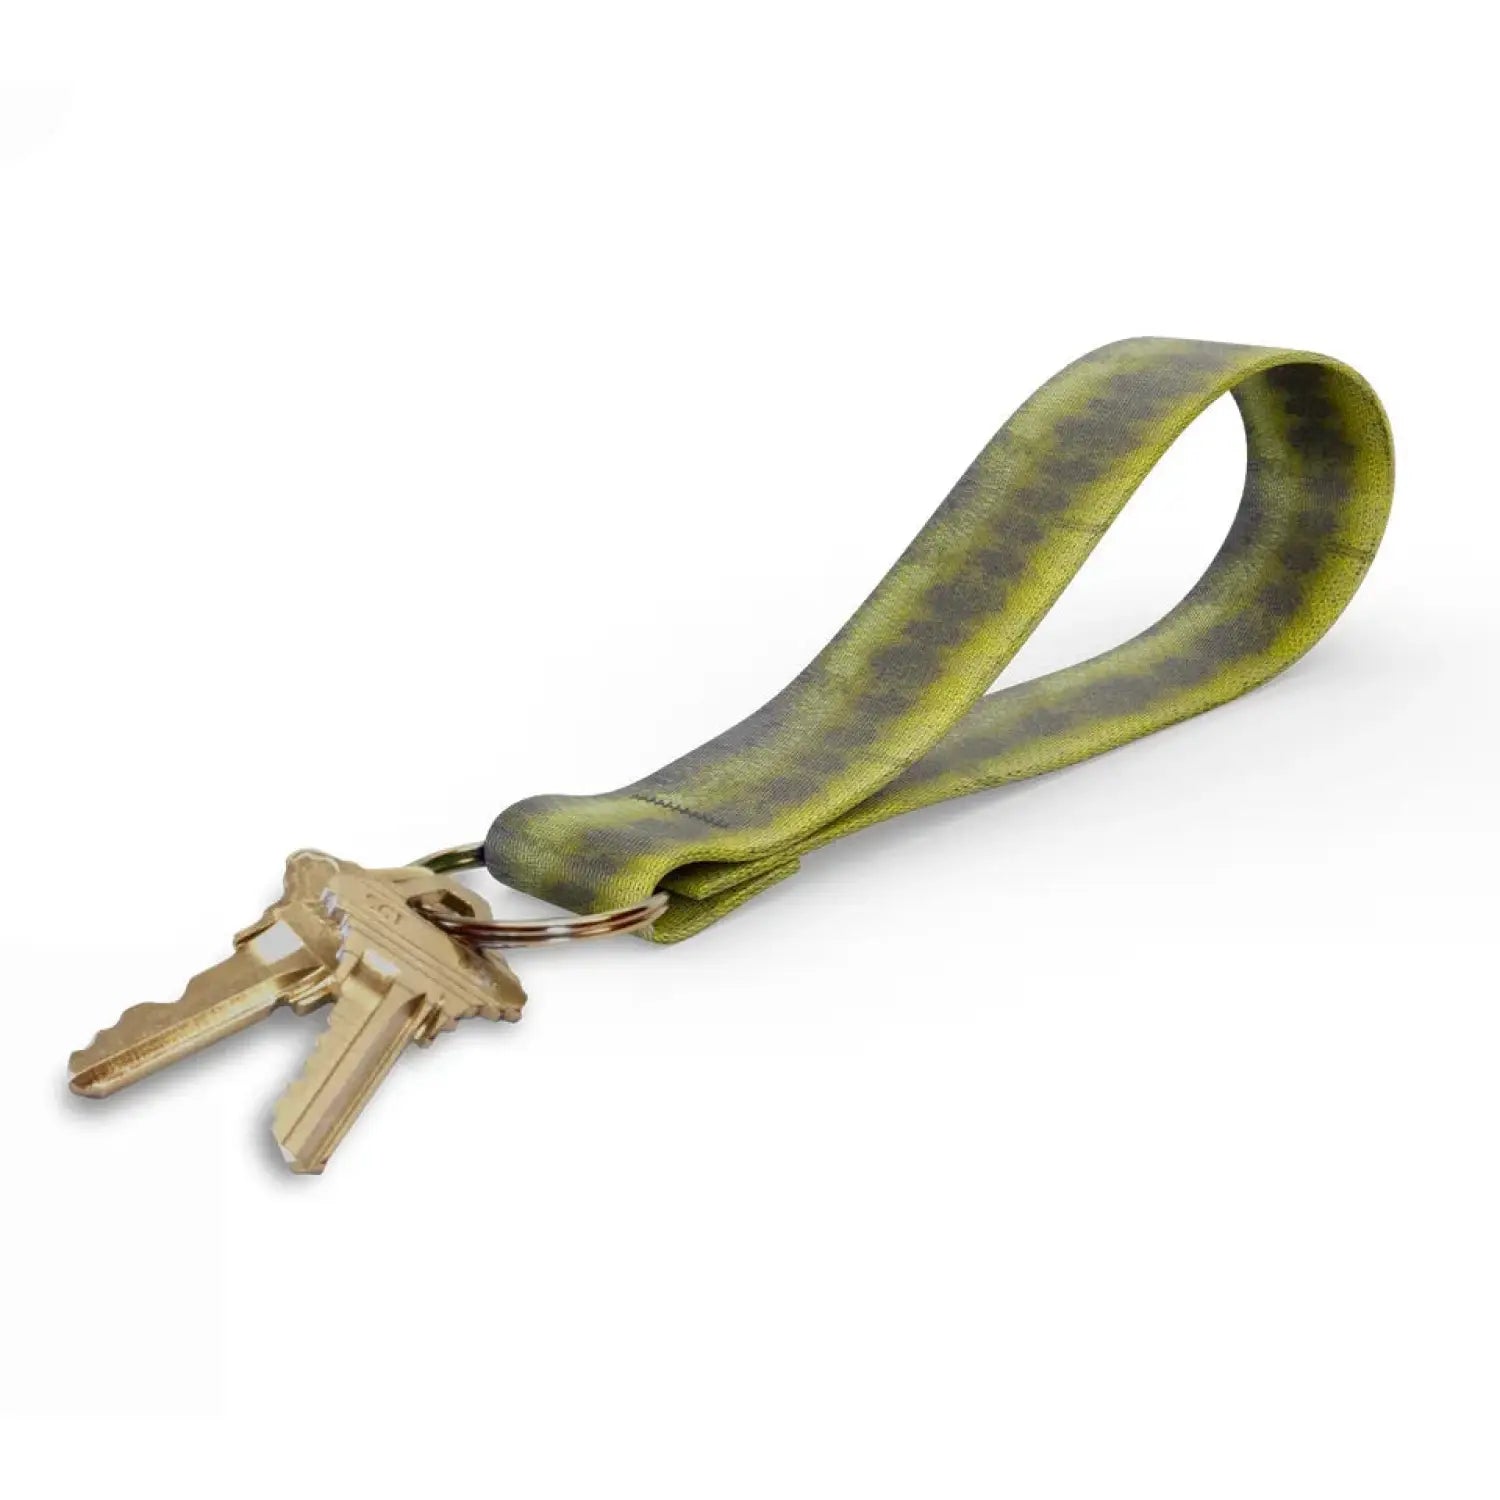 Wingo Key Fob in Largemouth Bass design. Brown and yellow shades shown with metal ring and keys.